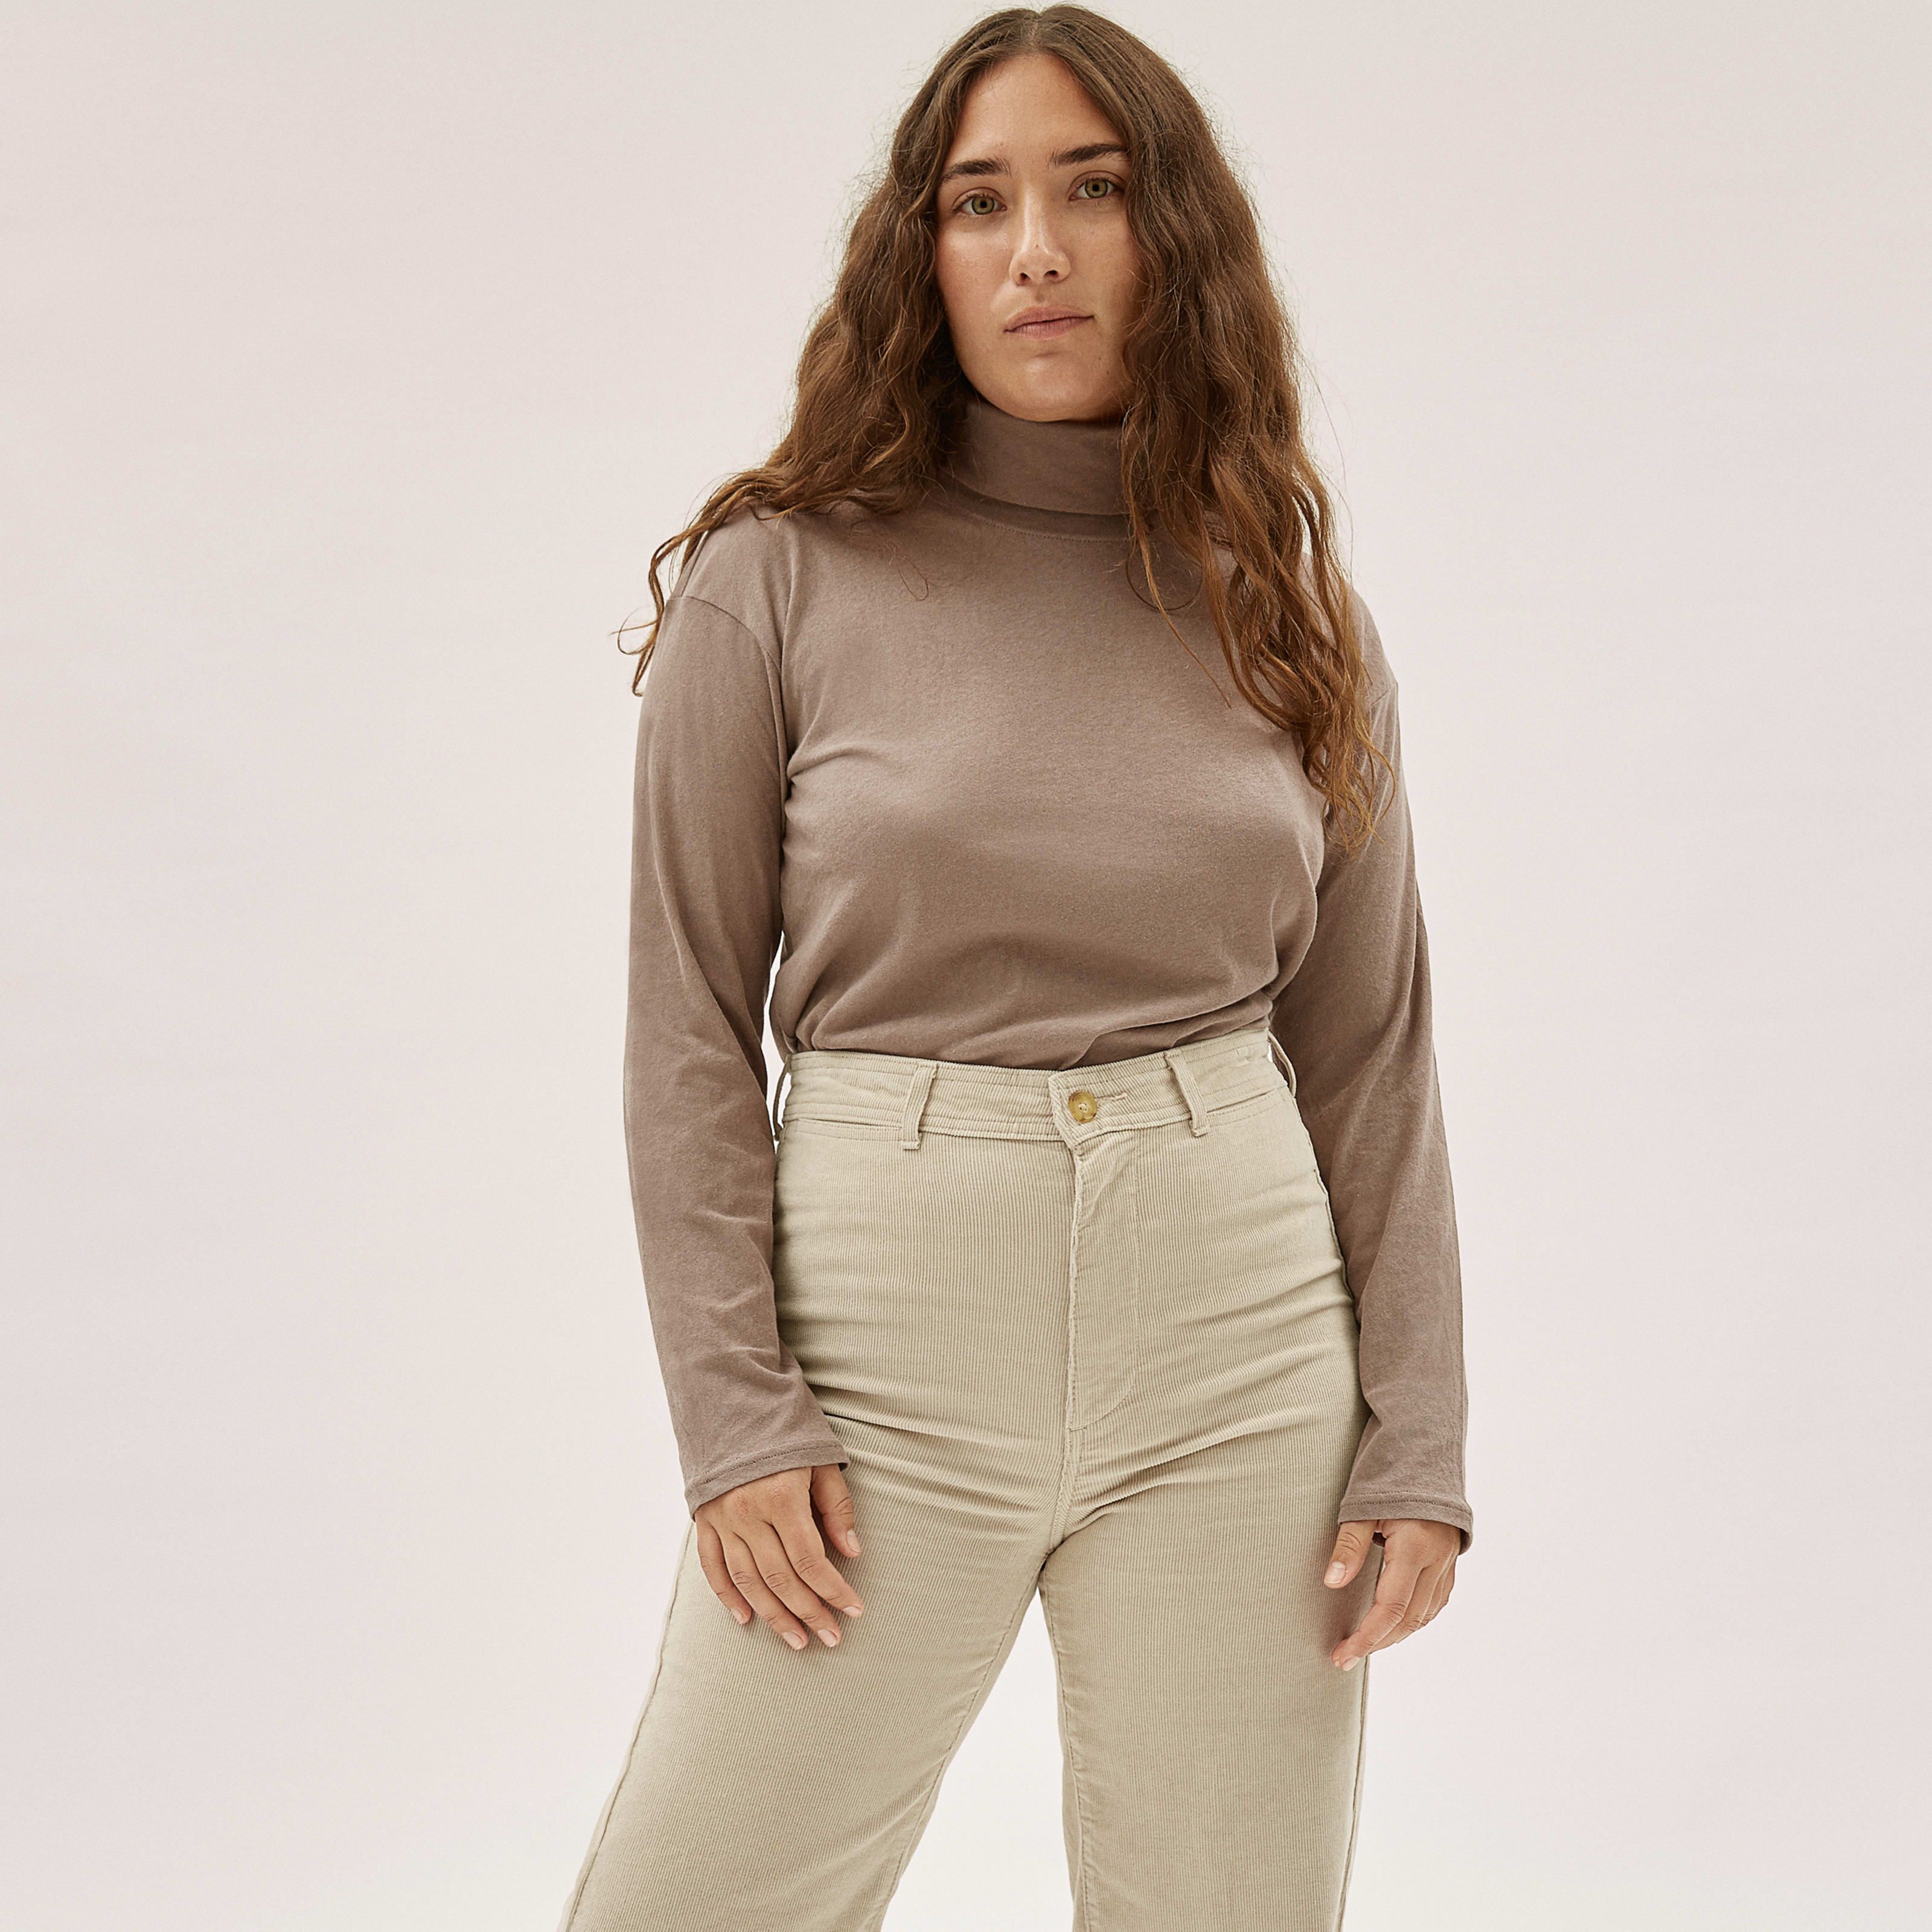 Women's Air Turtleneck Sweater by Everlane in Clay, Size XS | Everlane